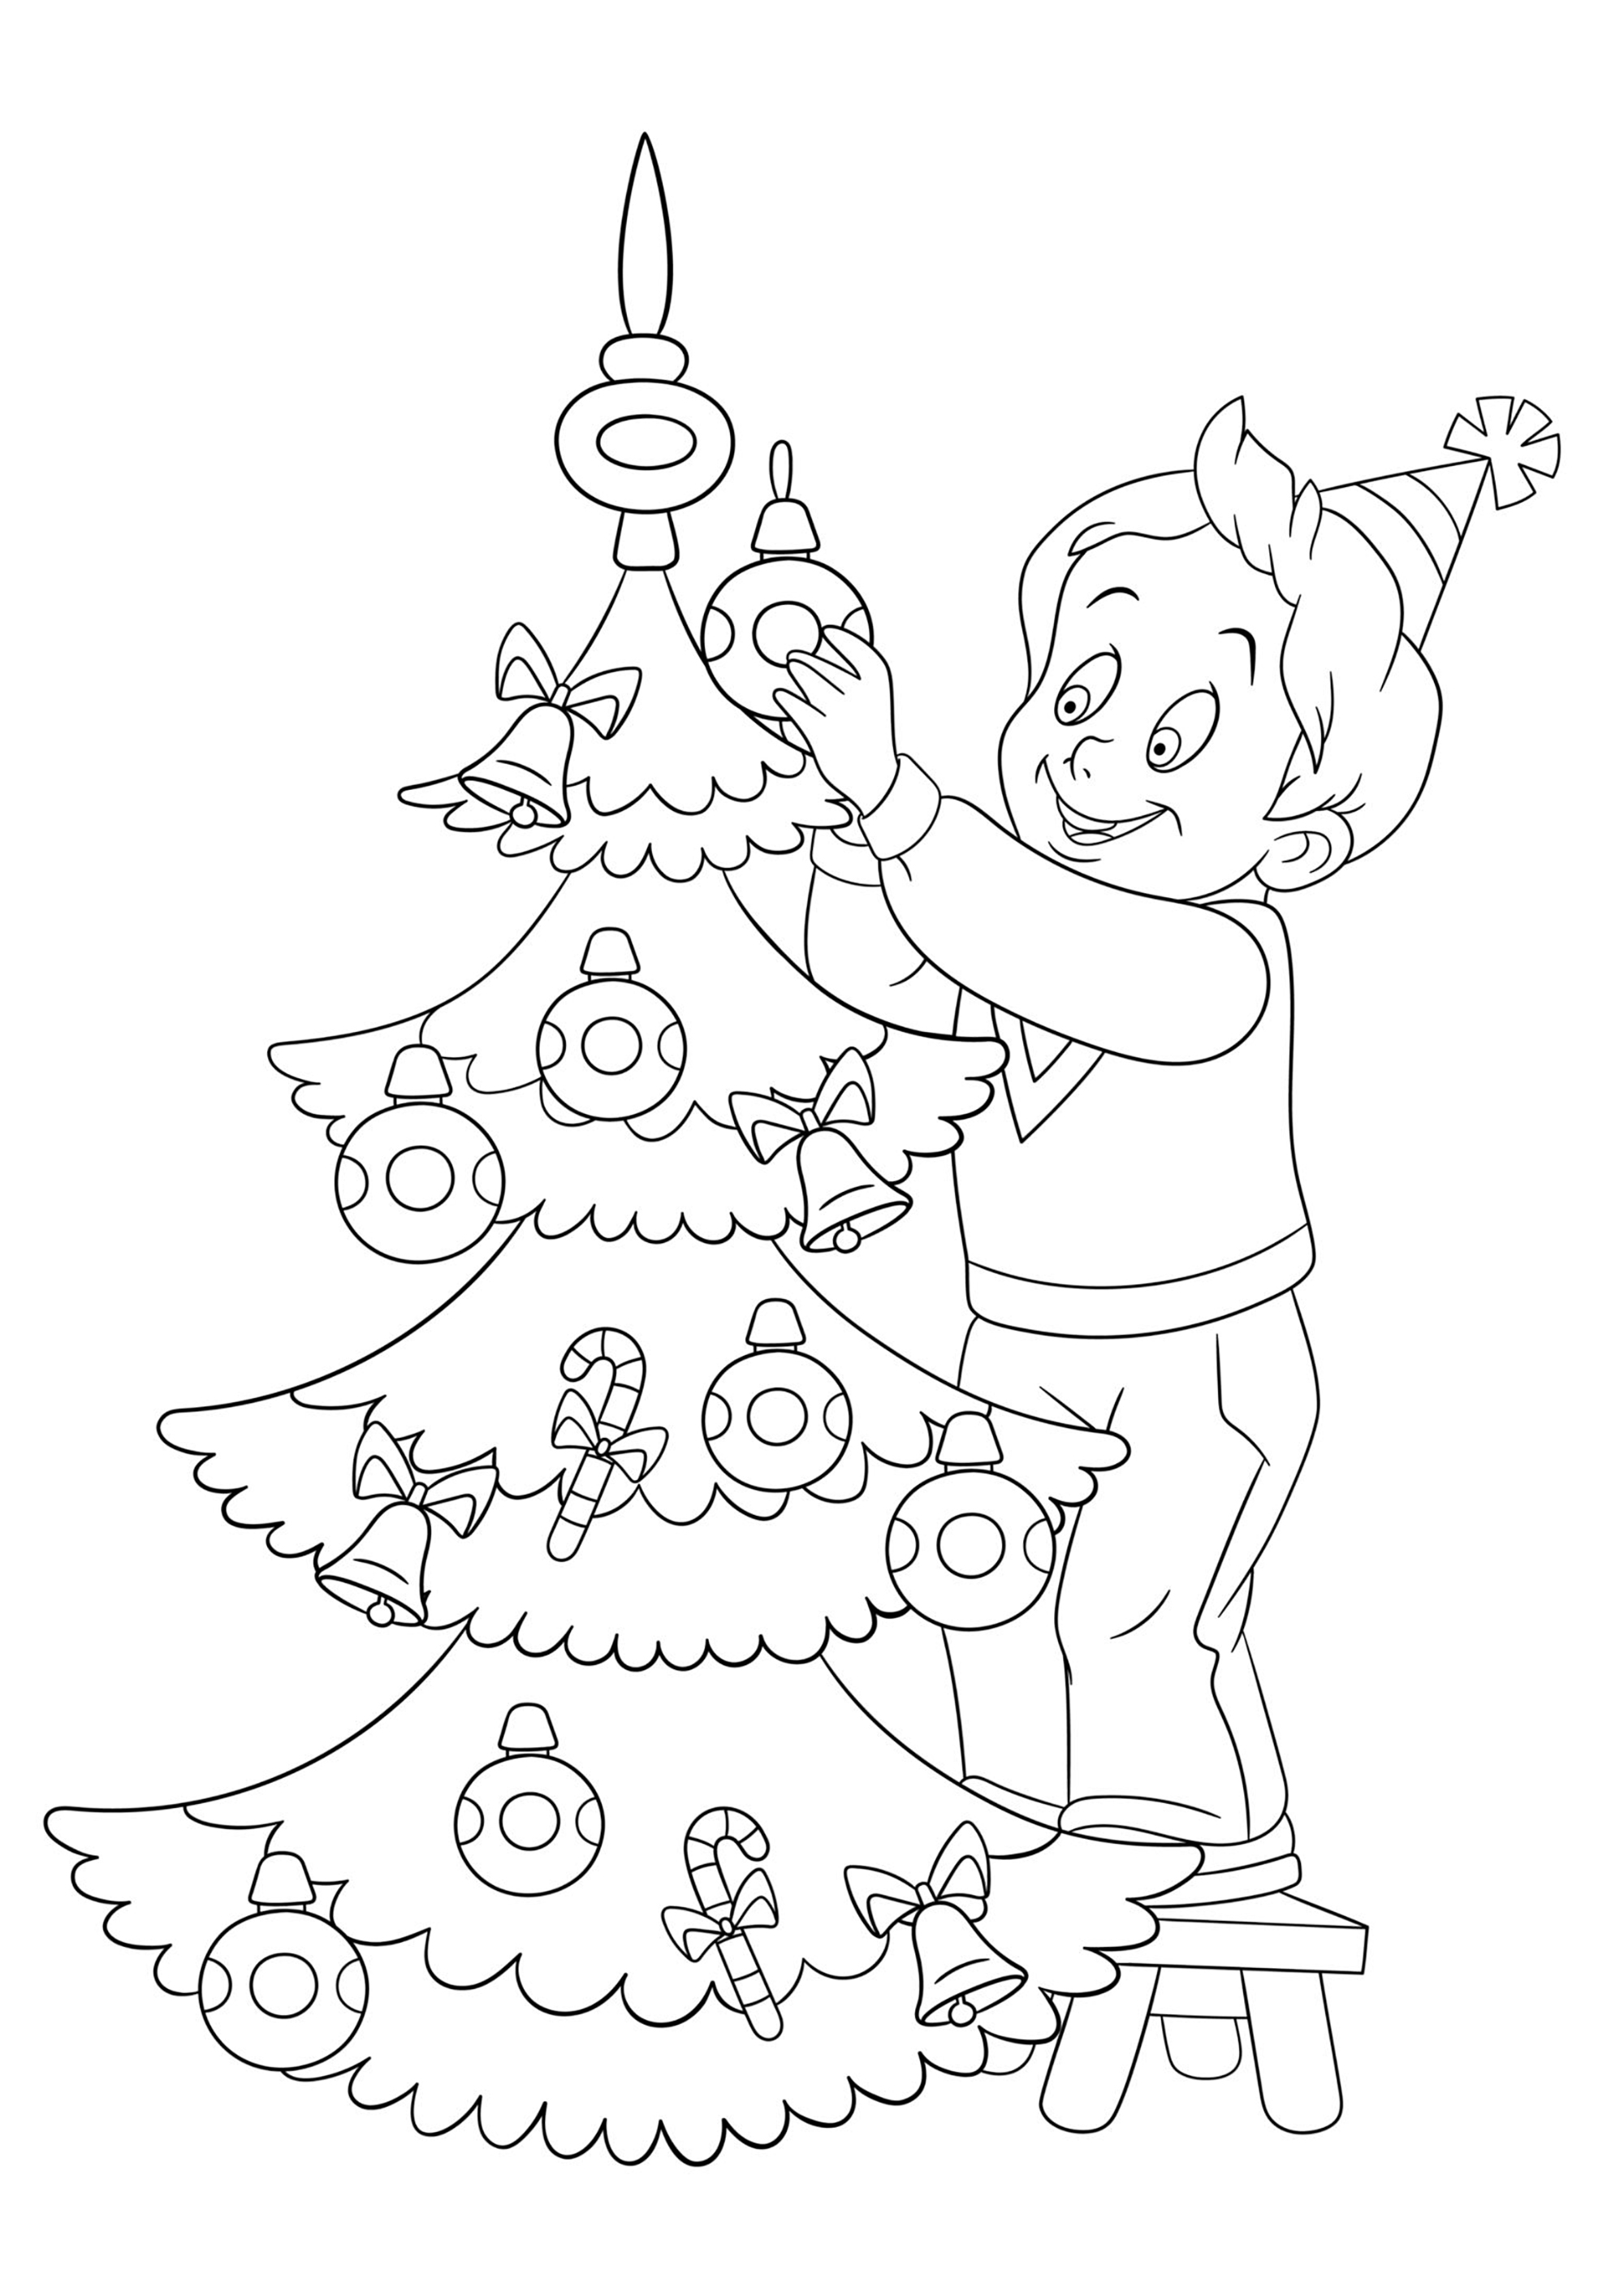 Download Christmas for children - Christmas Kids Coloring Pages